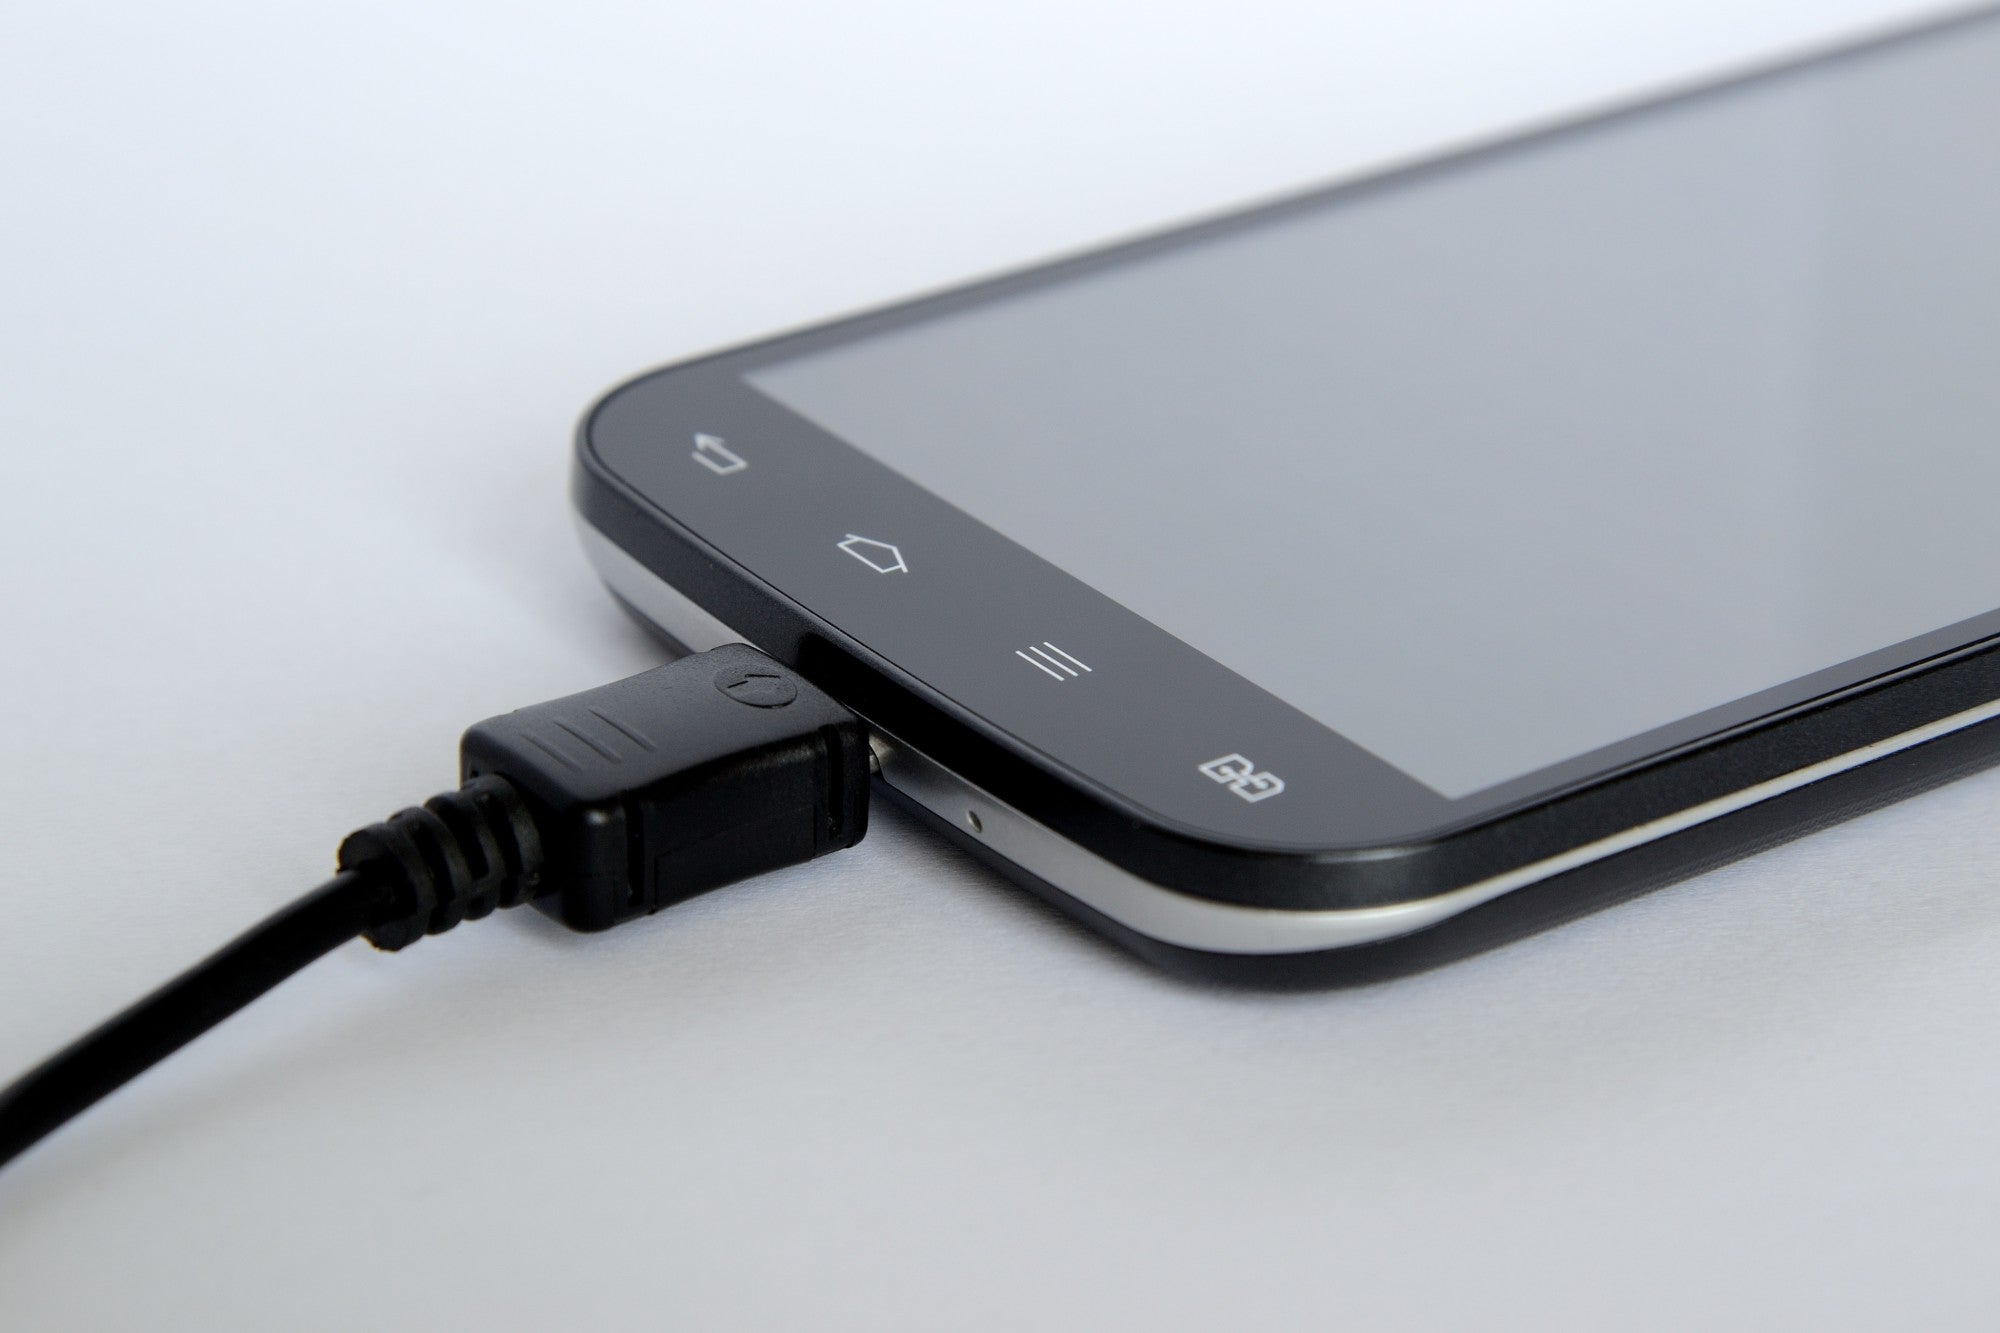 Do Shorter Phone Charger Cables Charge Faster?